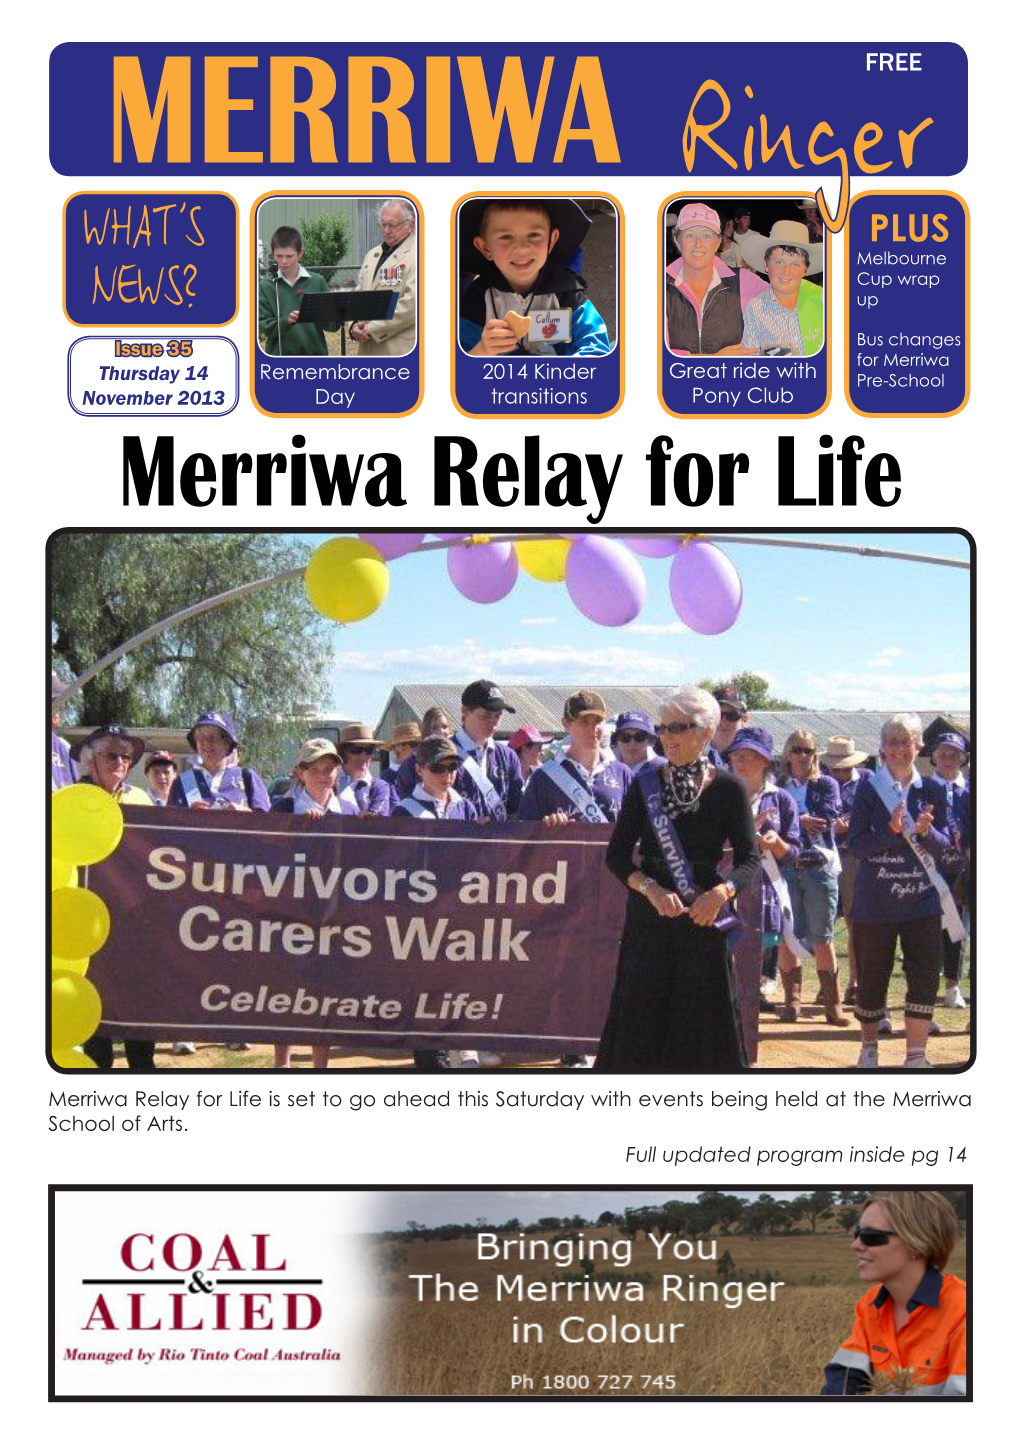 Merriwa Ringer Page 1 the WAIT IS OVER!